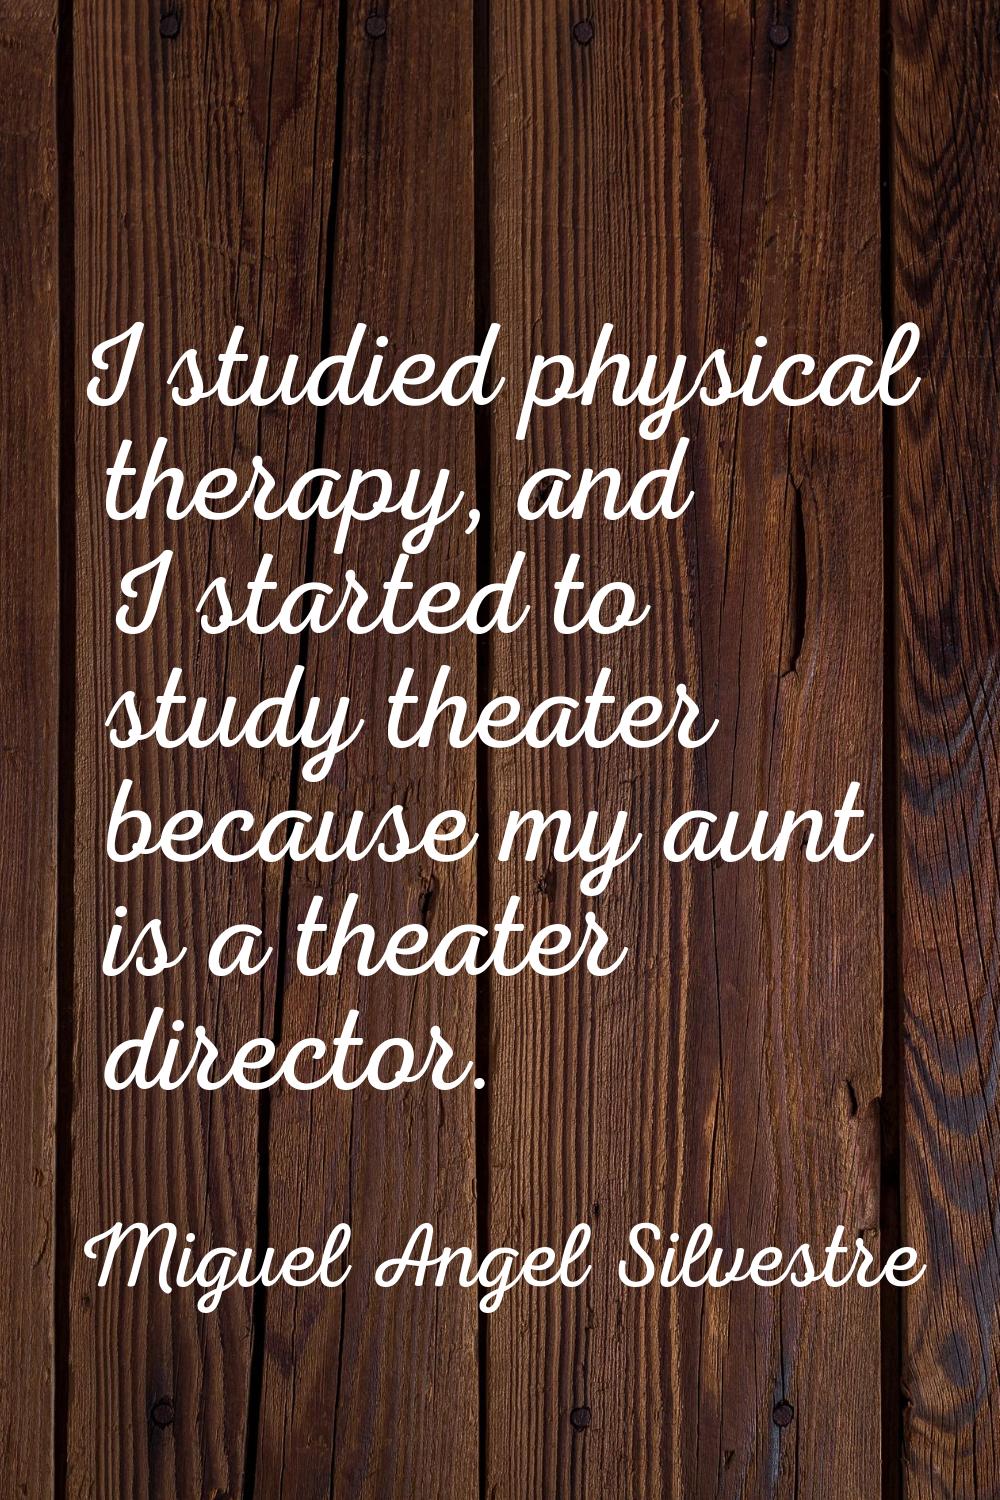 I studied physical therapy, and I started to study theater because my aunt is a theater director.